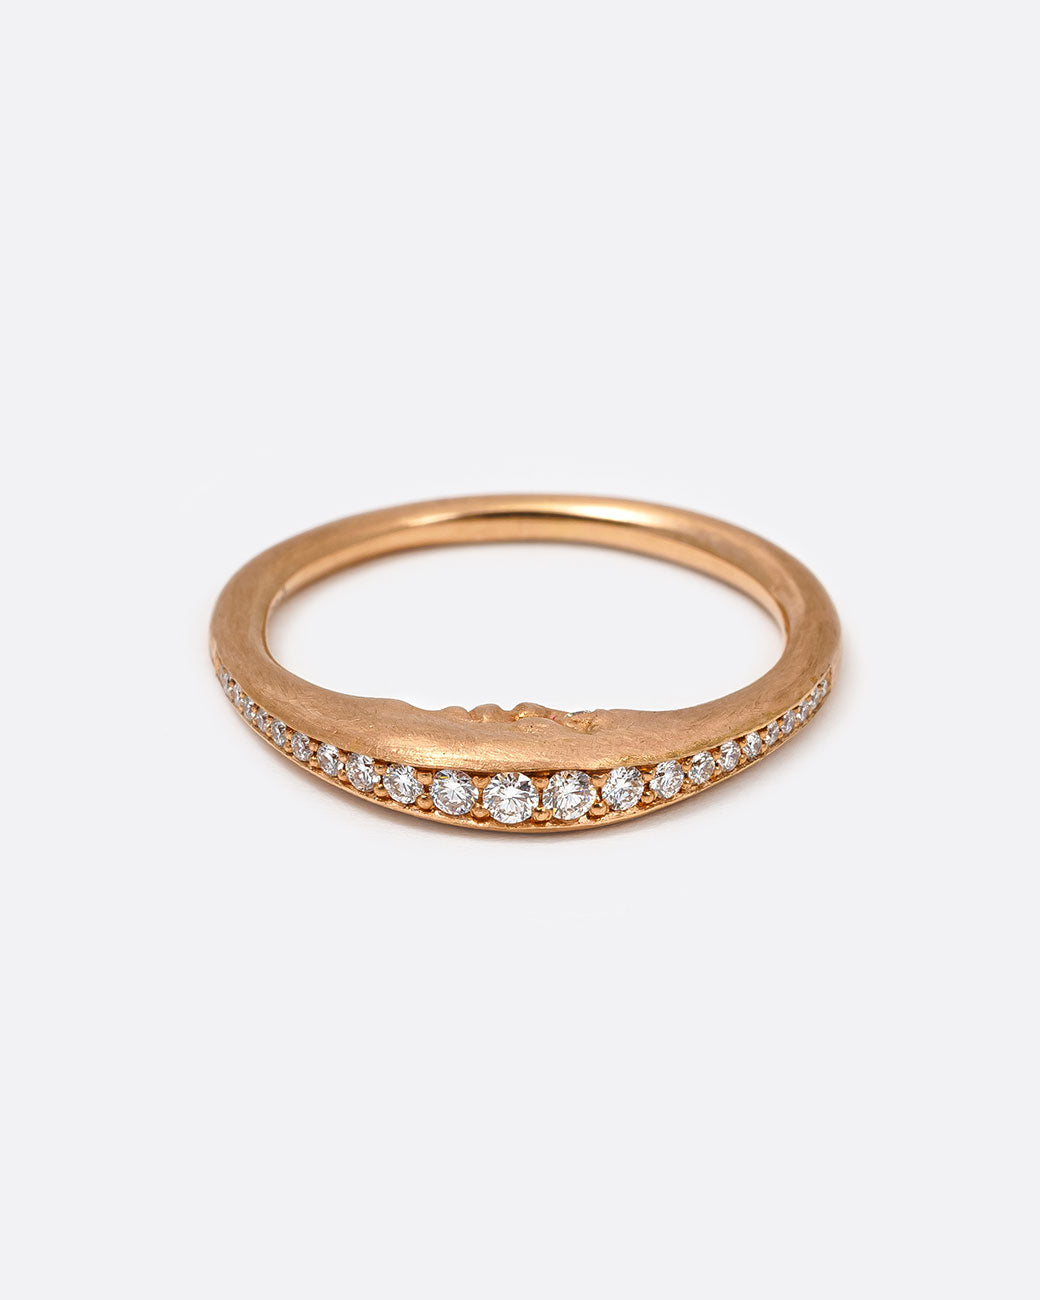 18k rose gold crescent moon ring by Anthony Lent with graduated white diamonds around the edge and a diamond eye, from the back.